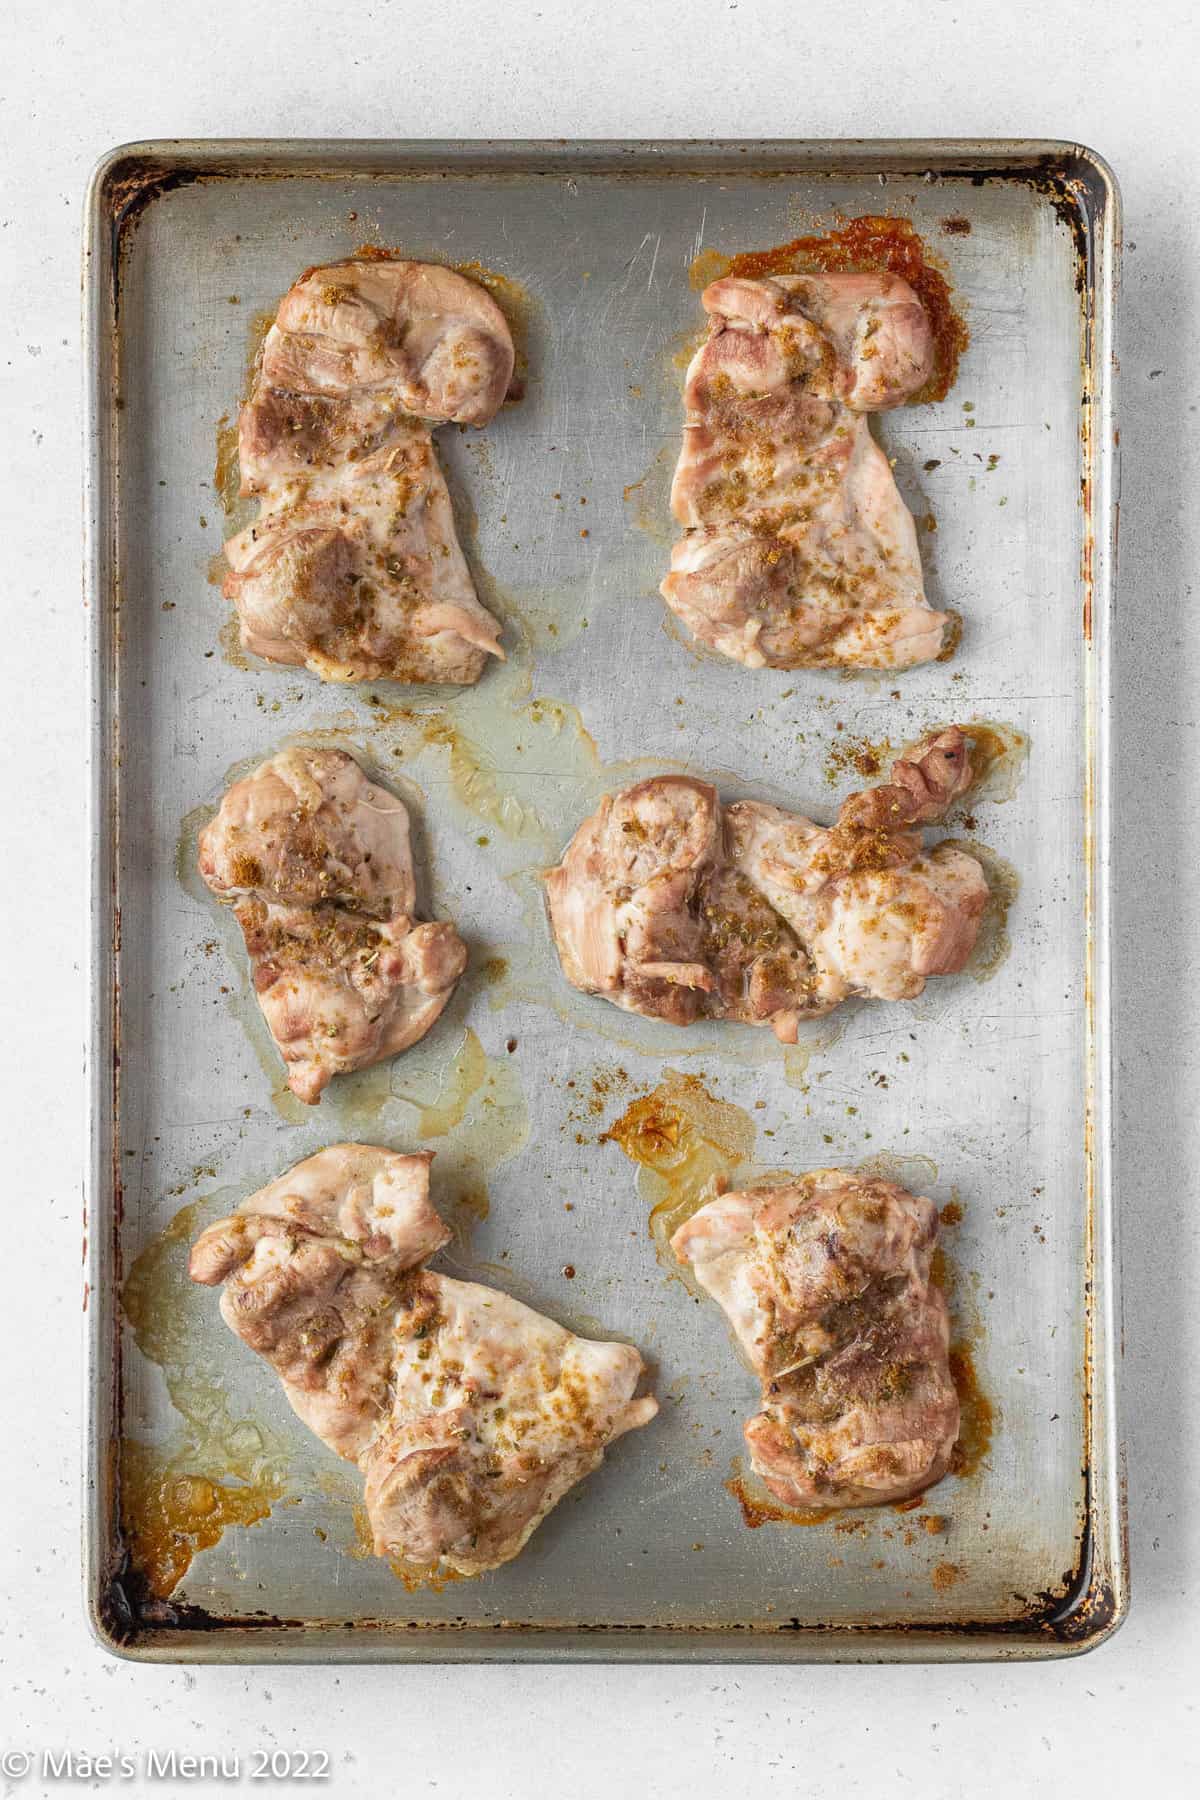 Baked chicken thighs on a baking sheet.